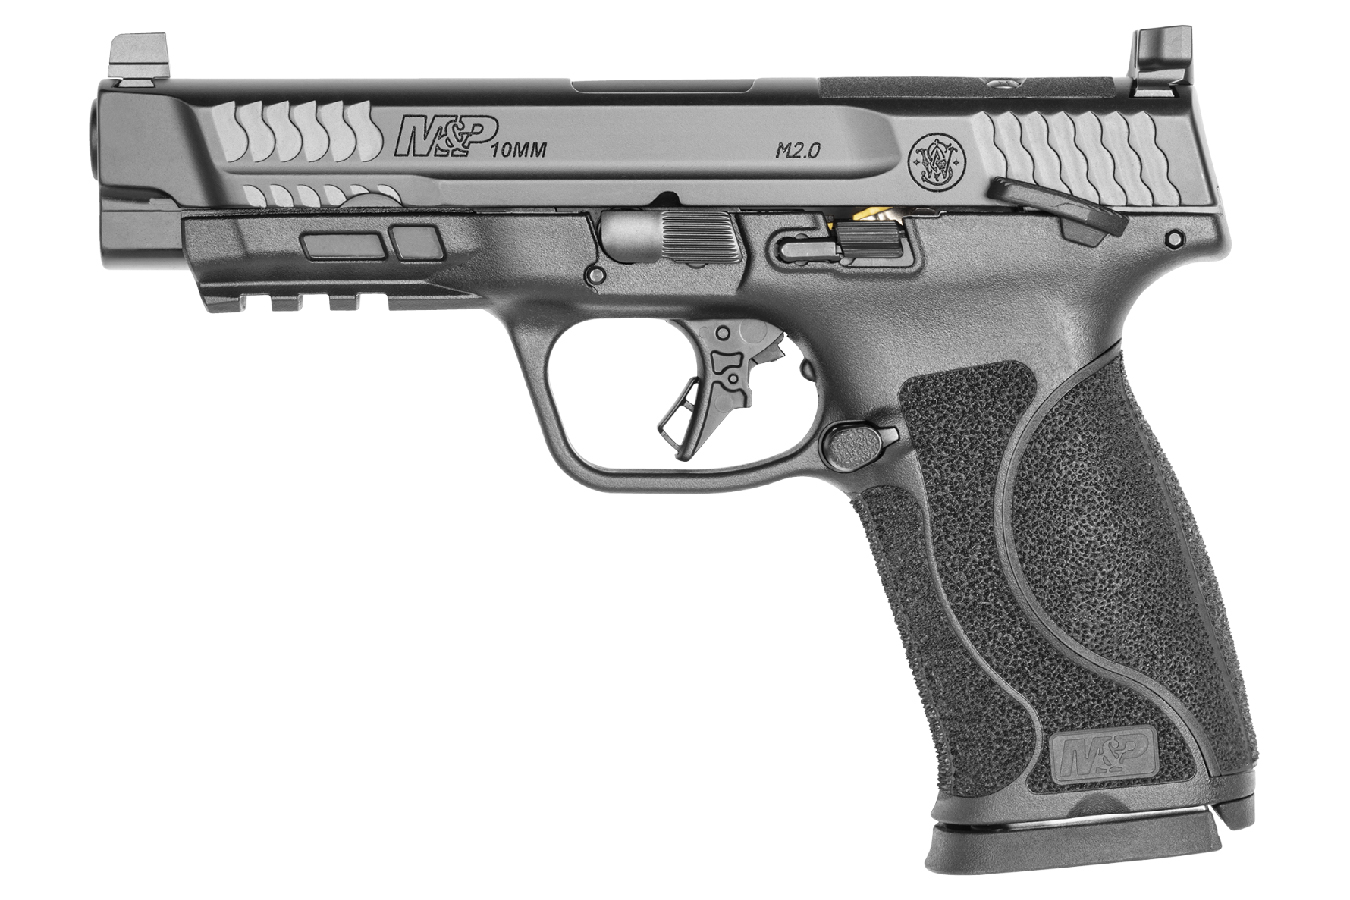 No. 18 Best Selling: SMITH AND WESSON MP10MM M2.0 OR OPTIC READY THUMB SAFETY BLK 4.6IN 15RND